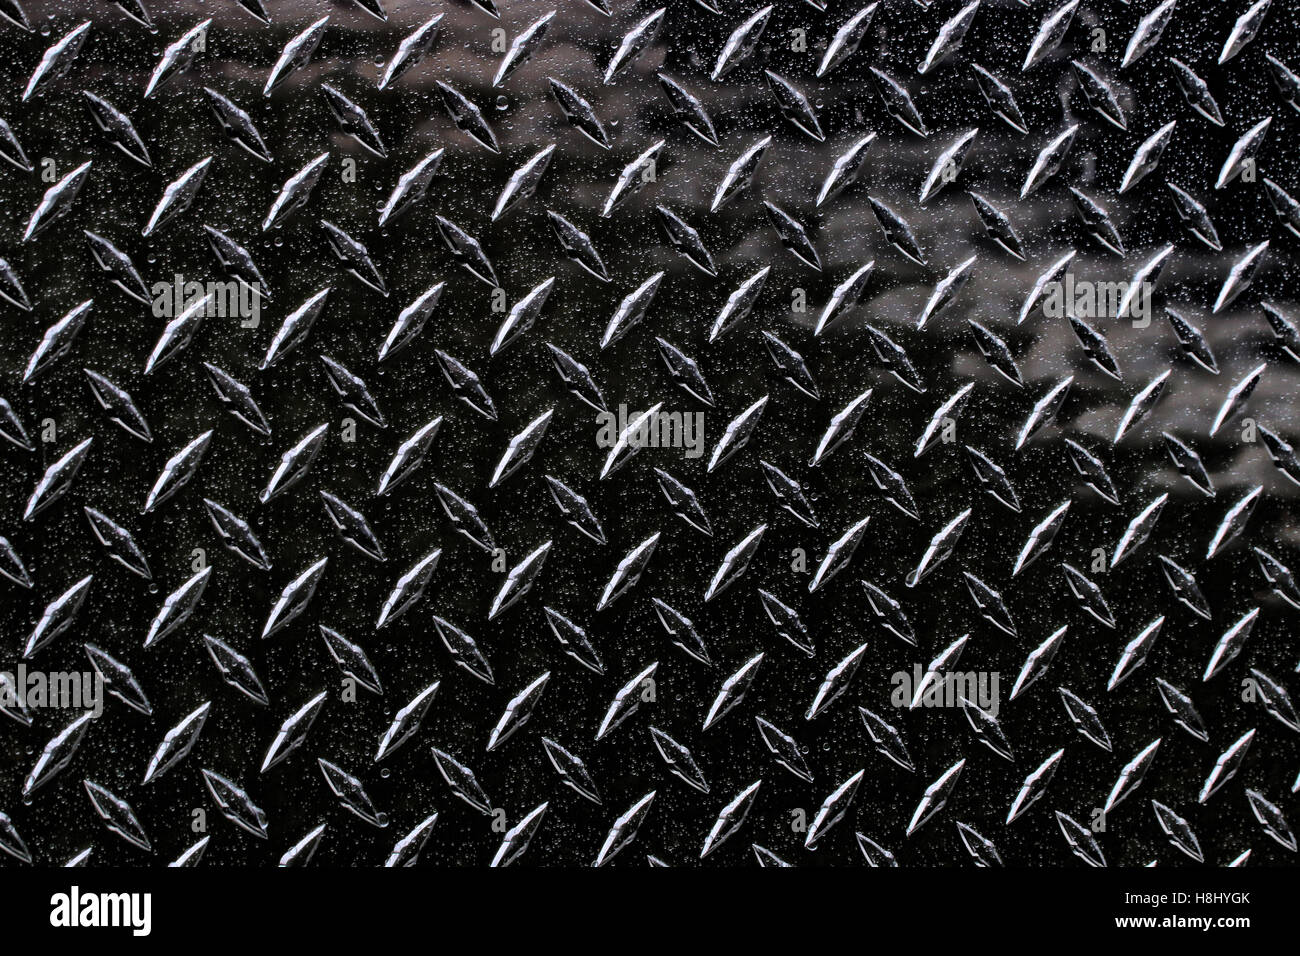 Sheet metal pattern of a Fire Engine Stock Photo